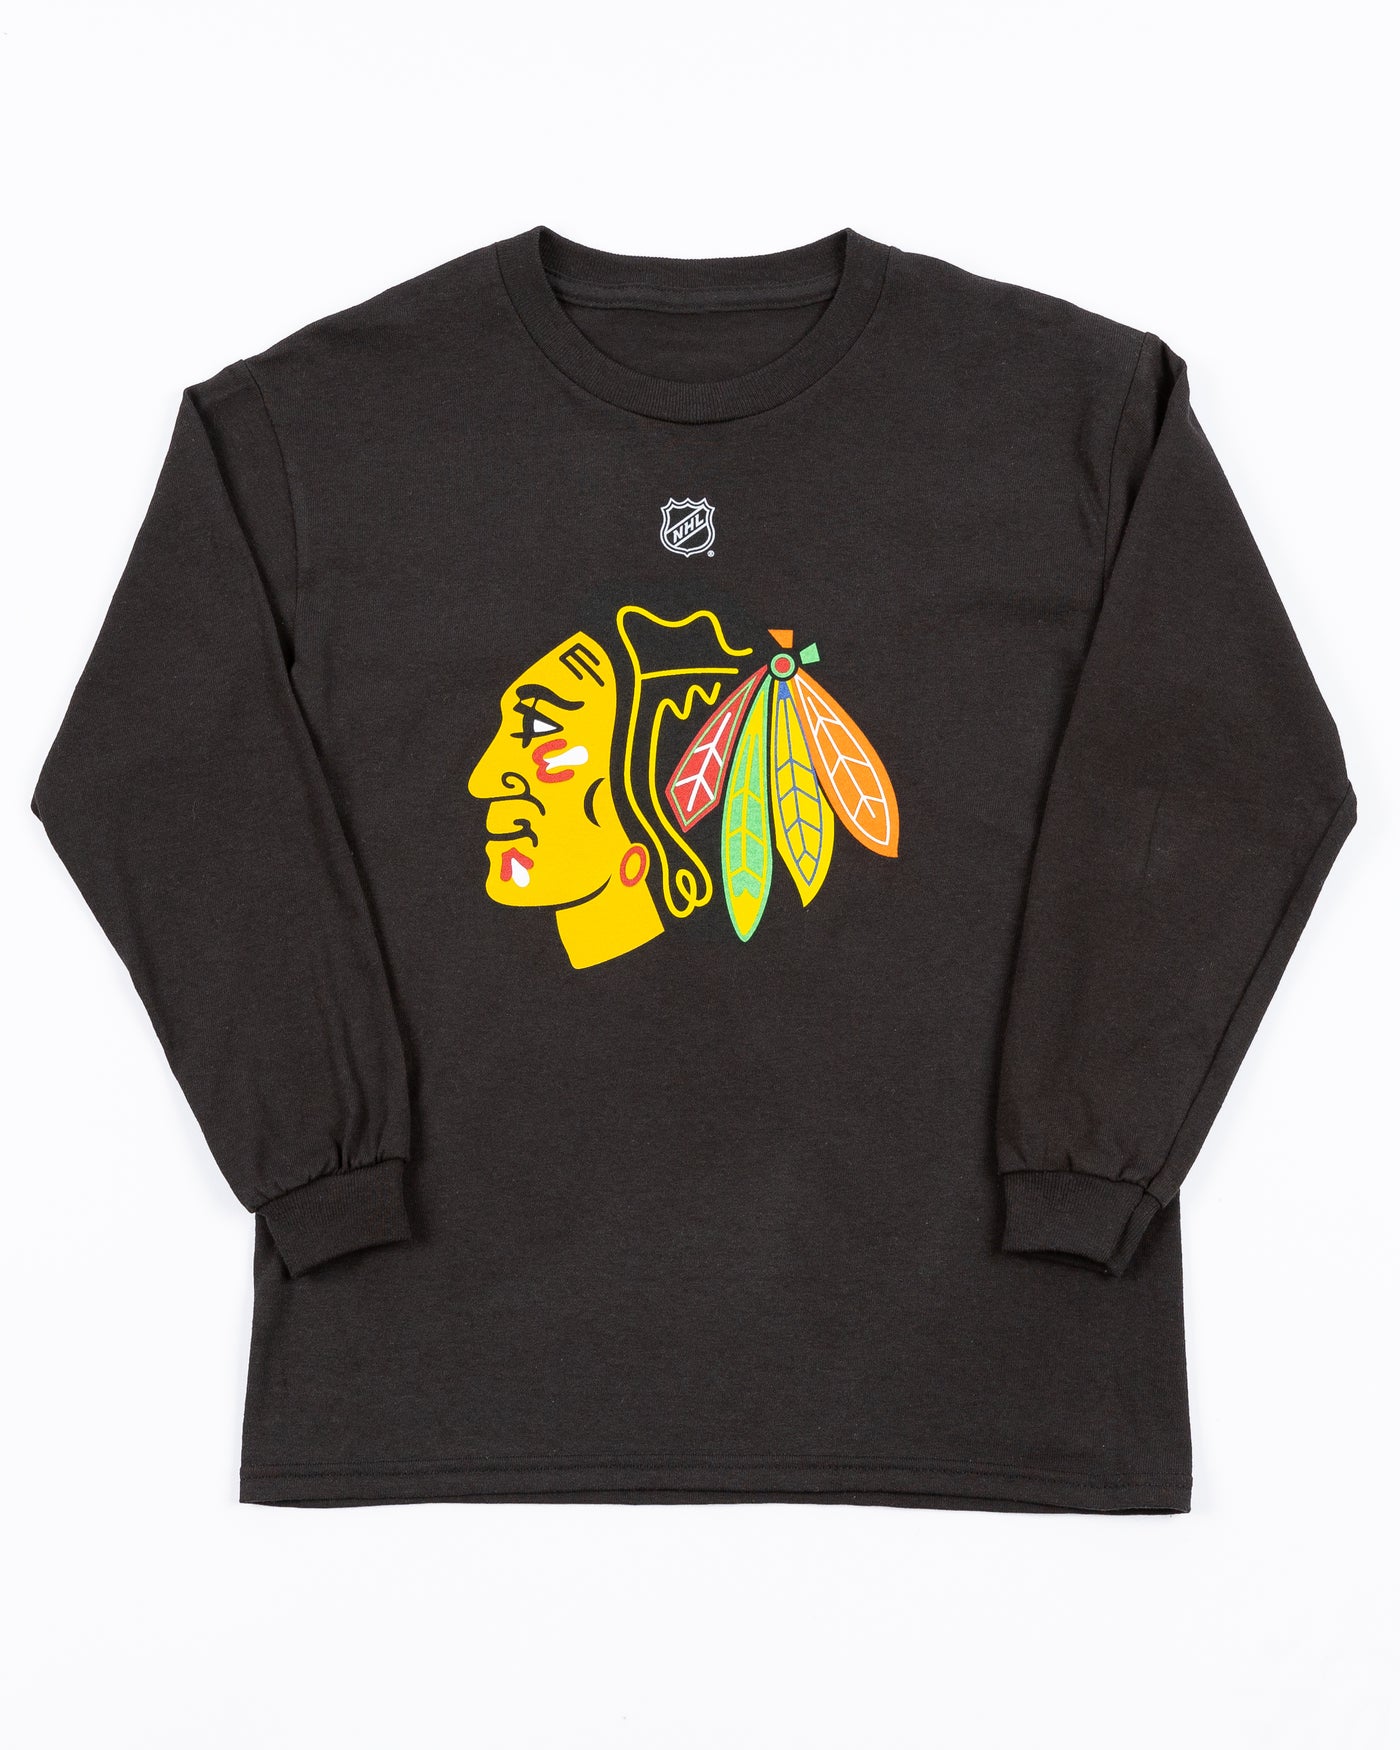 black Chicago Blackhawks youth long sleeve tee with primary logo across front - front lay flat